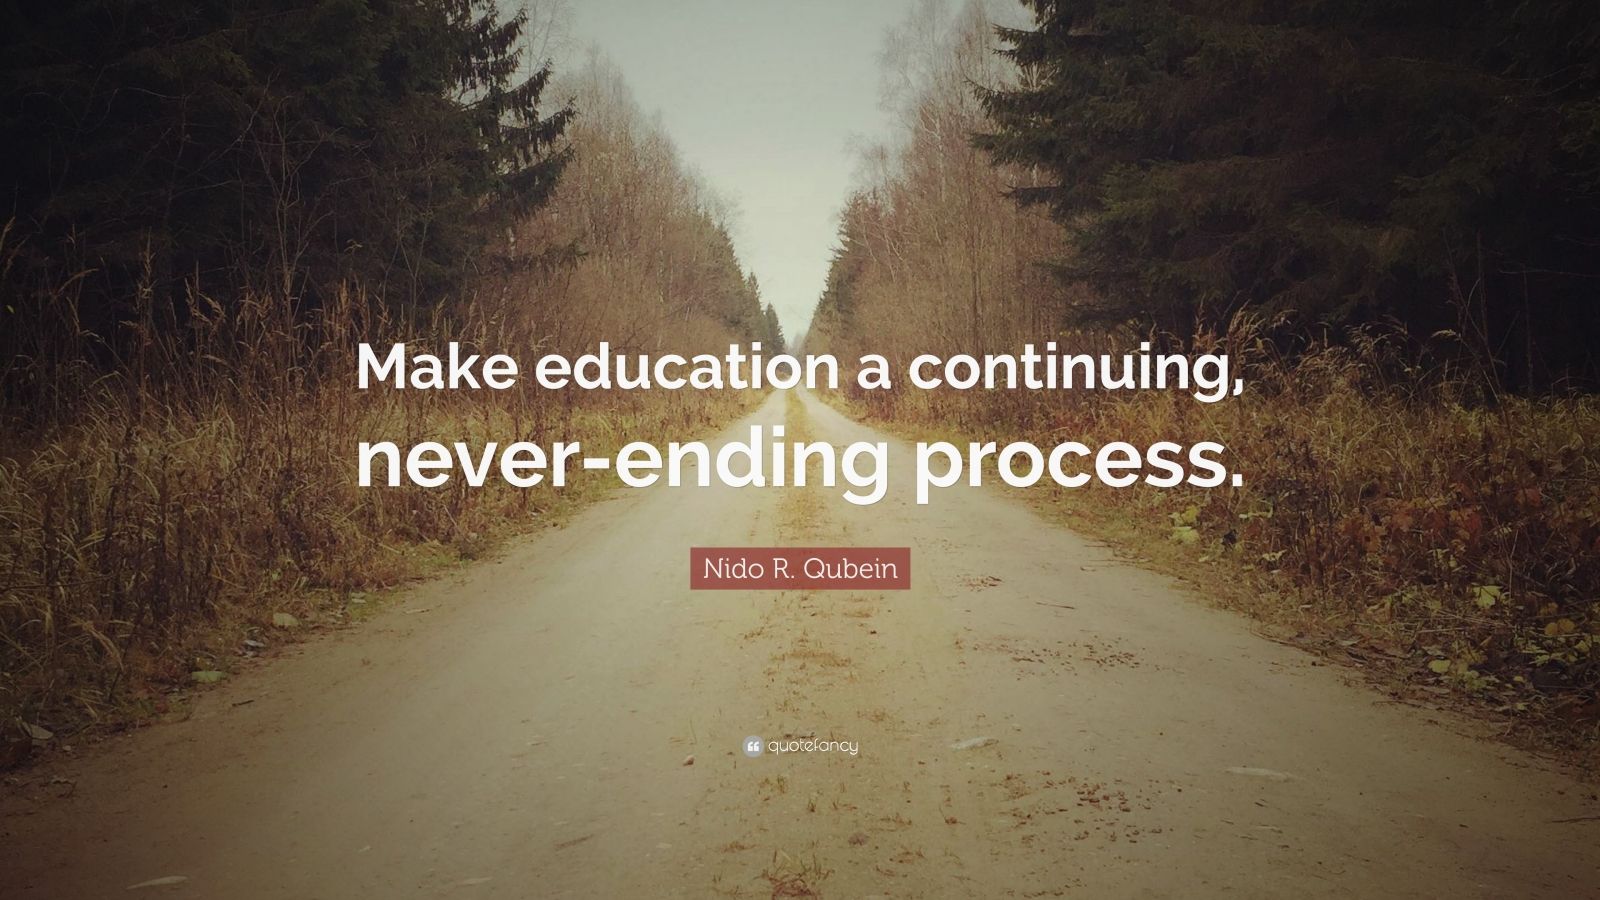 ending education quotes